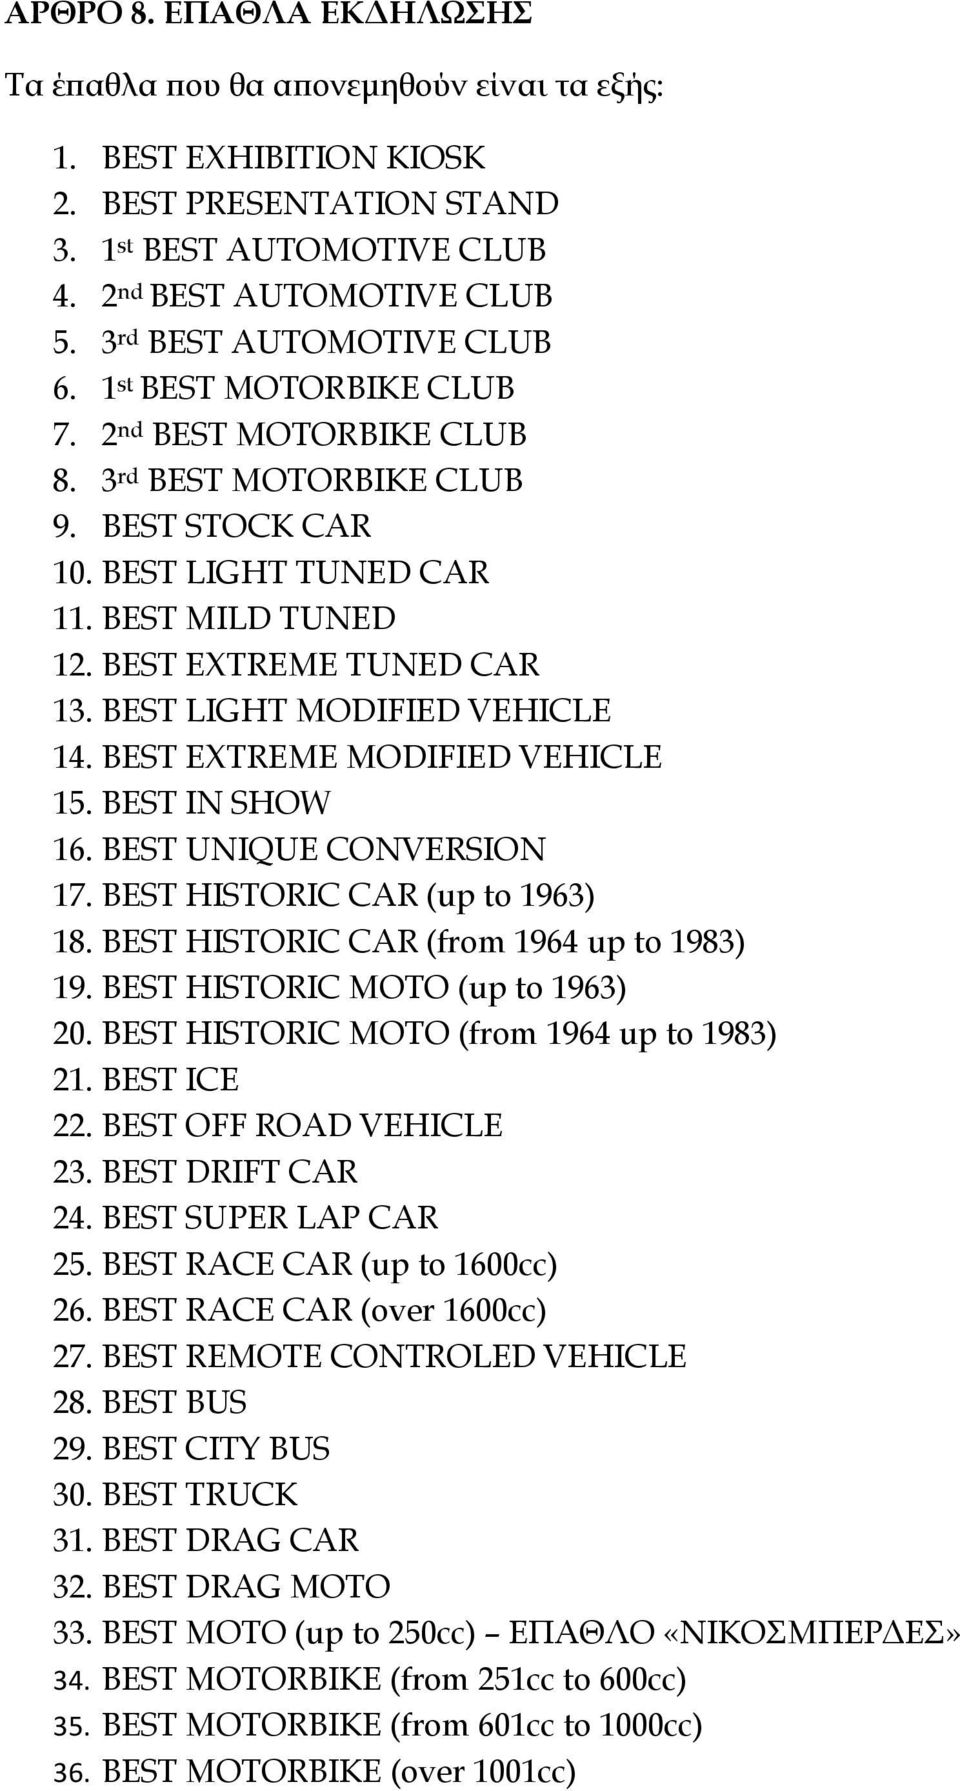 BEST EXTREME TUNED CAR 13. BEST LIGHT MODIFIED VEHICLE 14. BEST EXTREME MODIFIED VEHICLE 15. BEST IN SHOW 16. BEST UNIQUE CONVERSION 17. BEST HISTORIC CAR (up to 1963) 18.